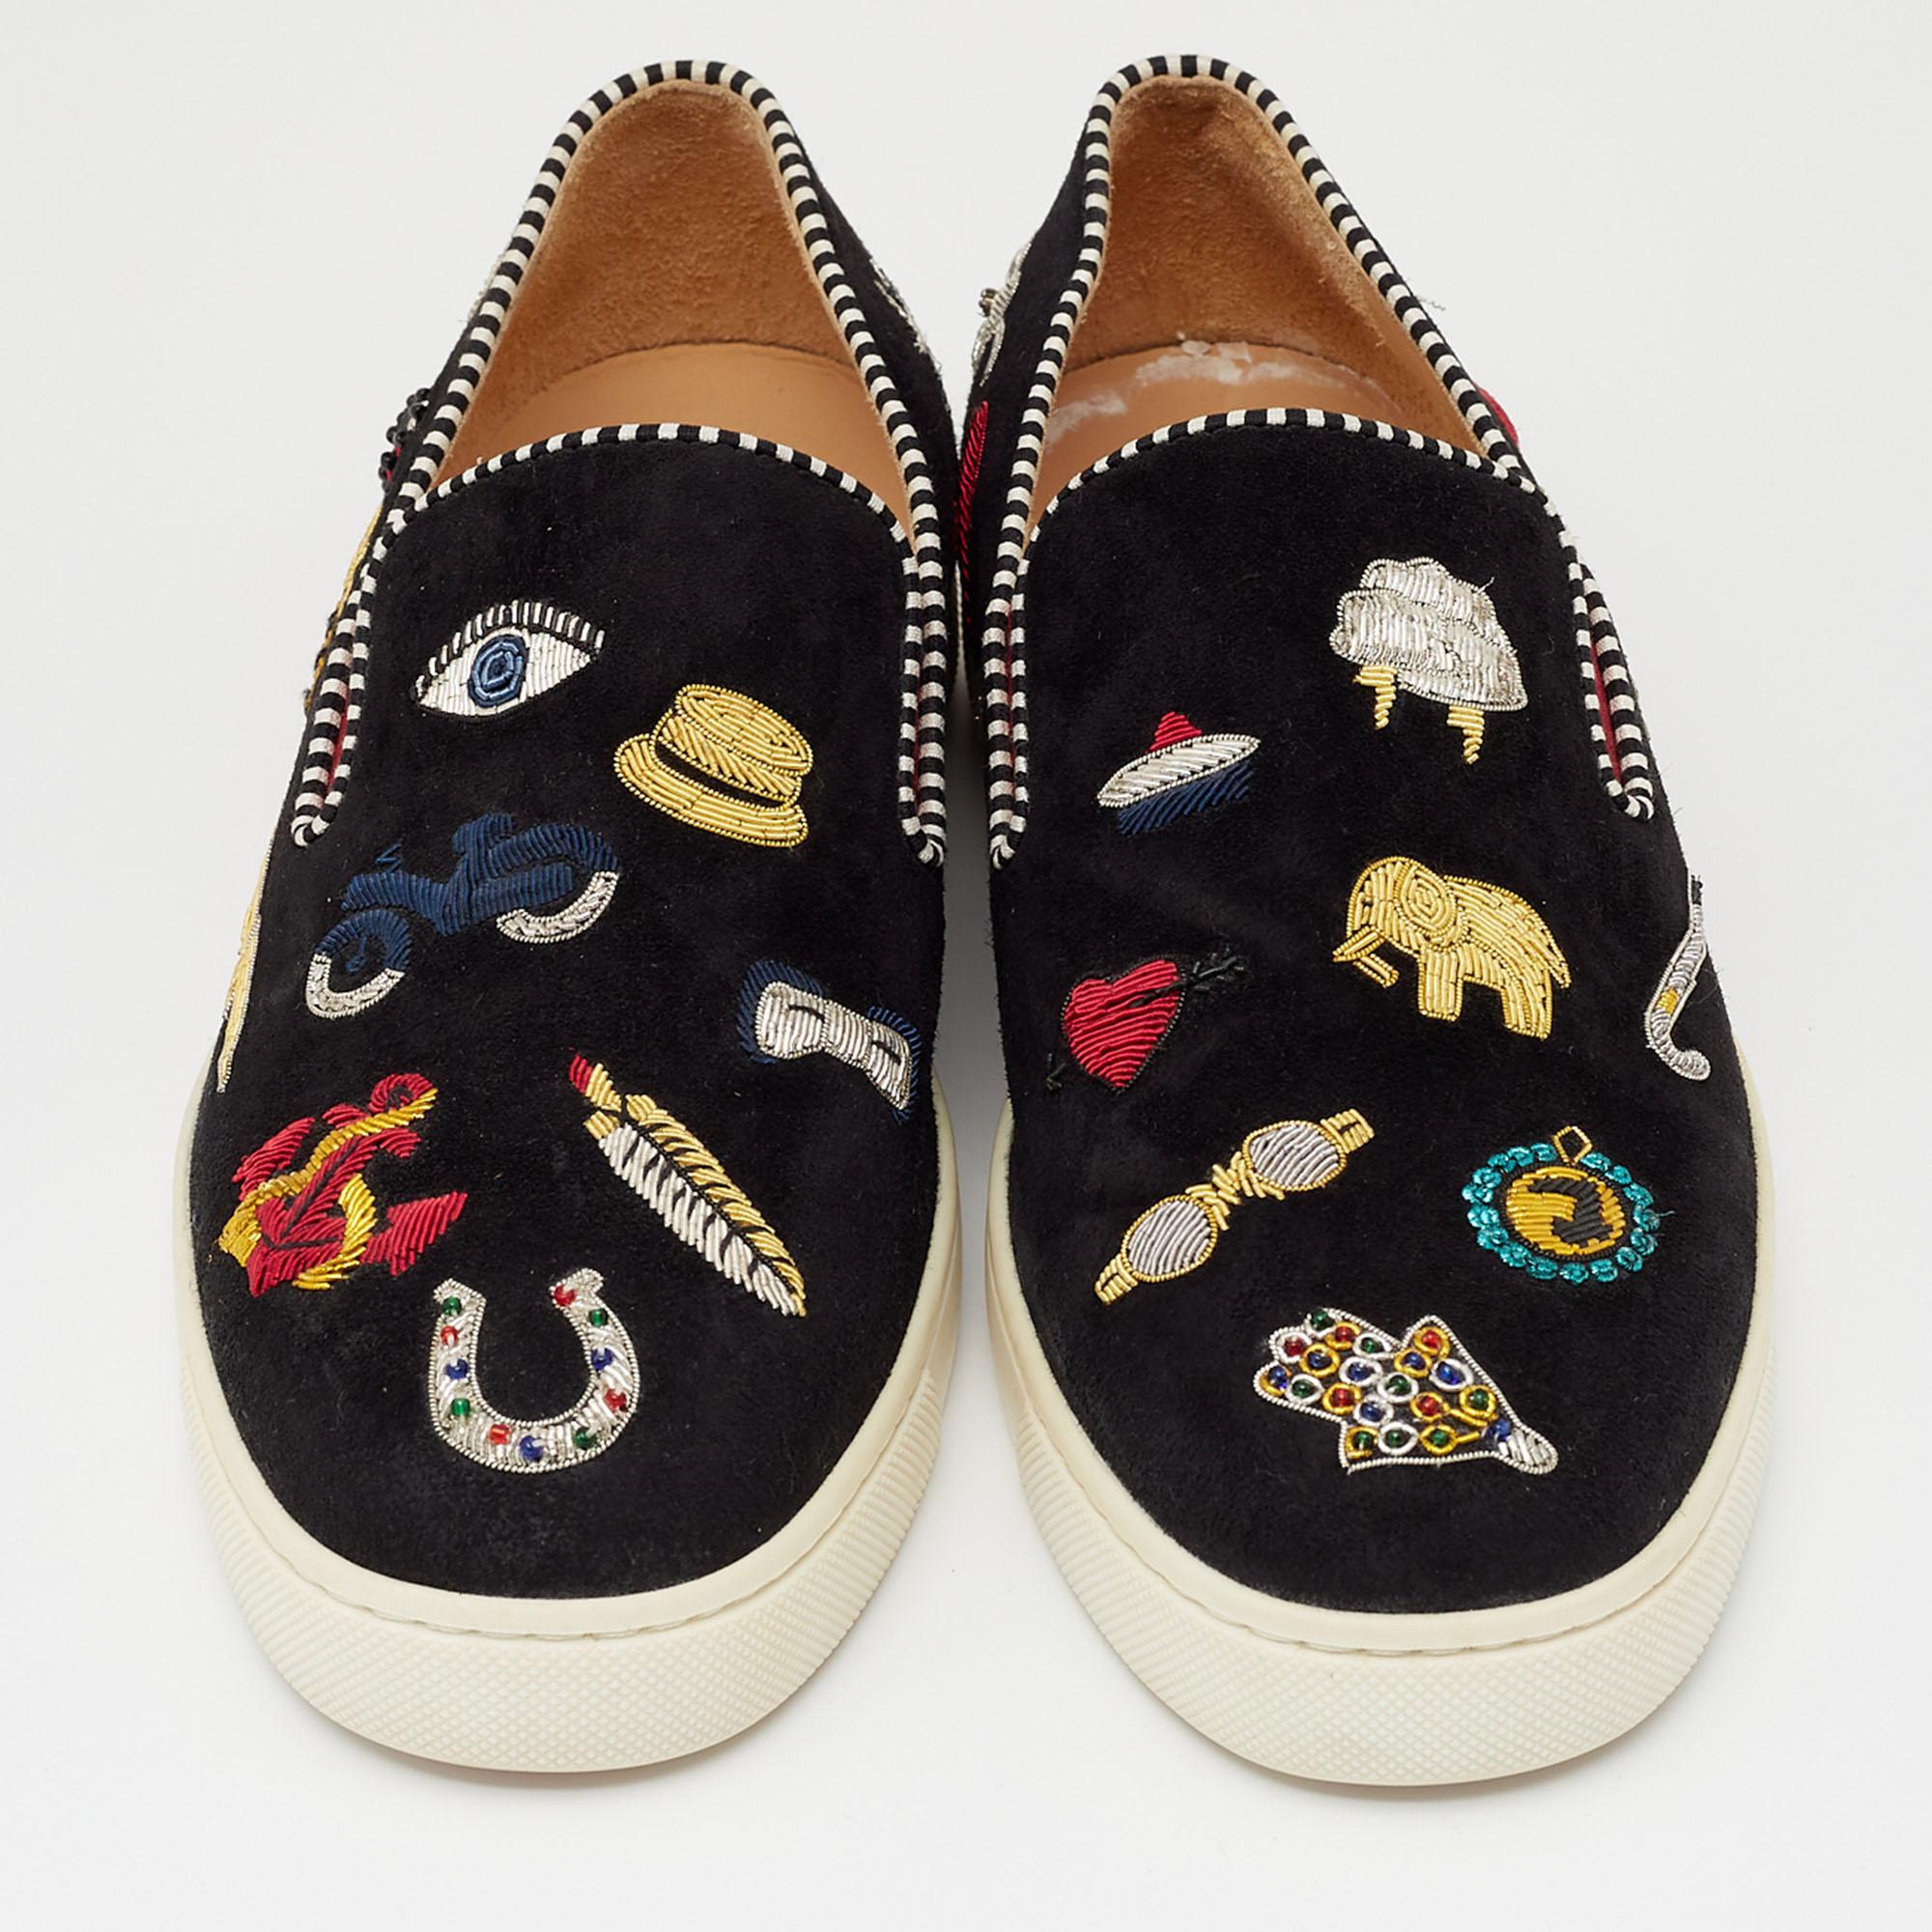 Find complete comfort, panache, and style as you walk in these sneakers from the House of Christian Louboutin. Made from black suede, these sneakers are embellished with multicolored appliques throughout. They flaunt an easy slip-on style and red